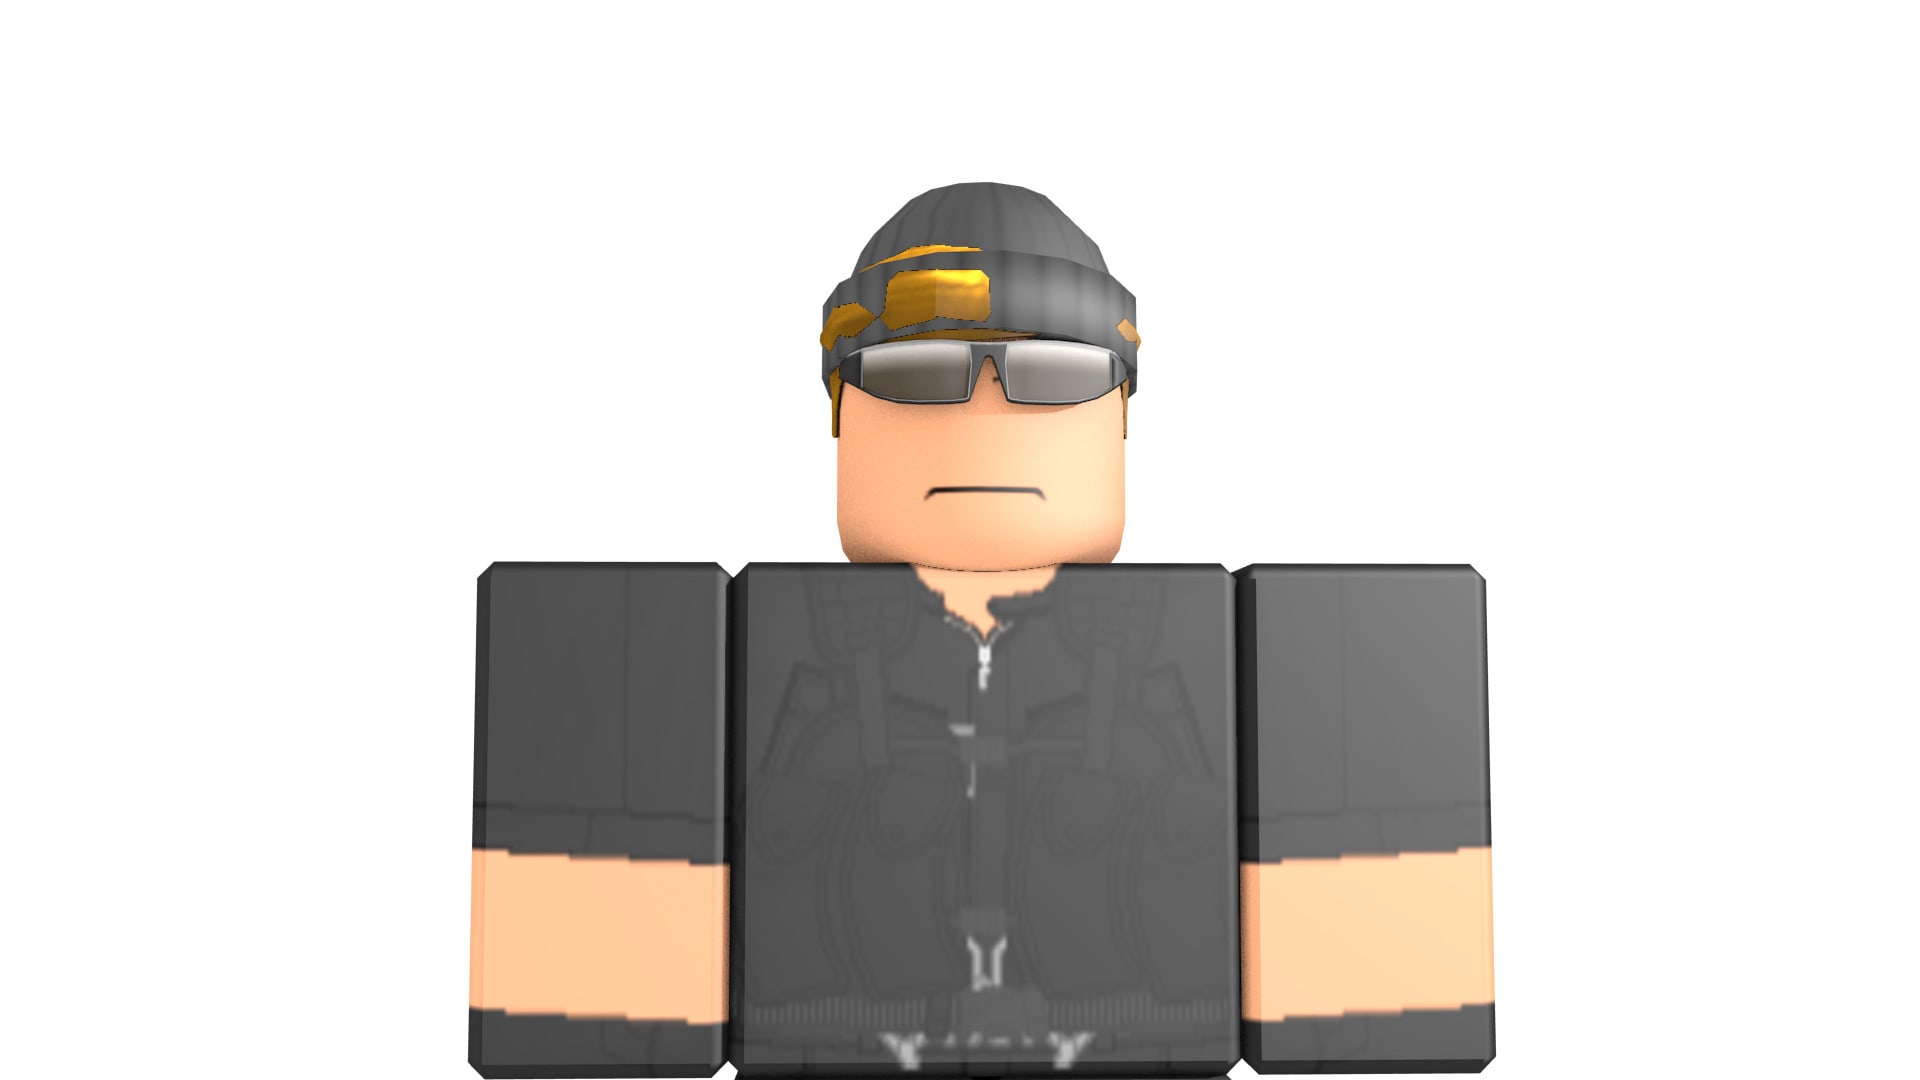 Render Your Roblox Character In 1920 X 1080 Hd By Vlanpai - justin roblox avatar